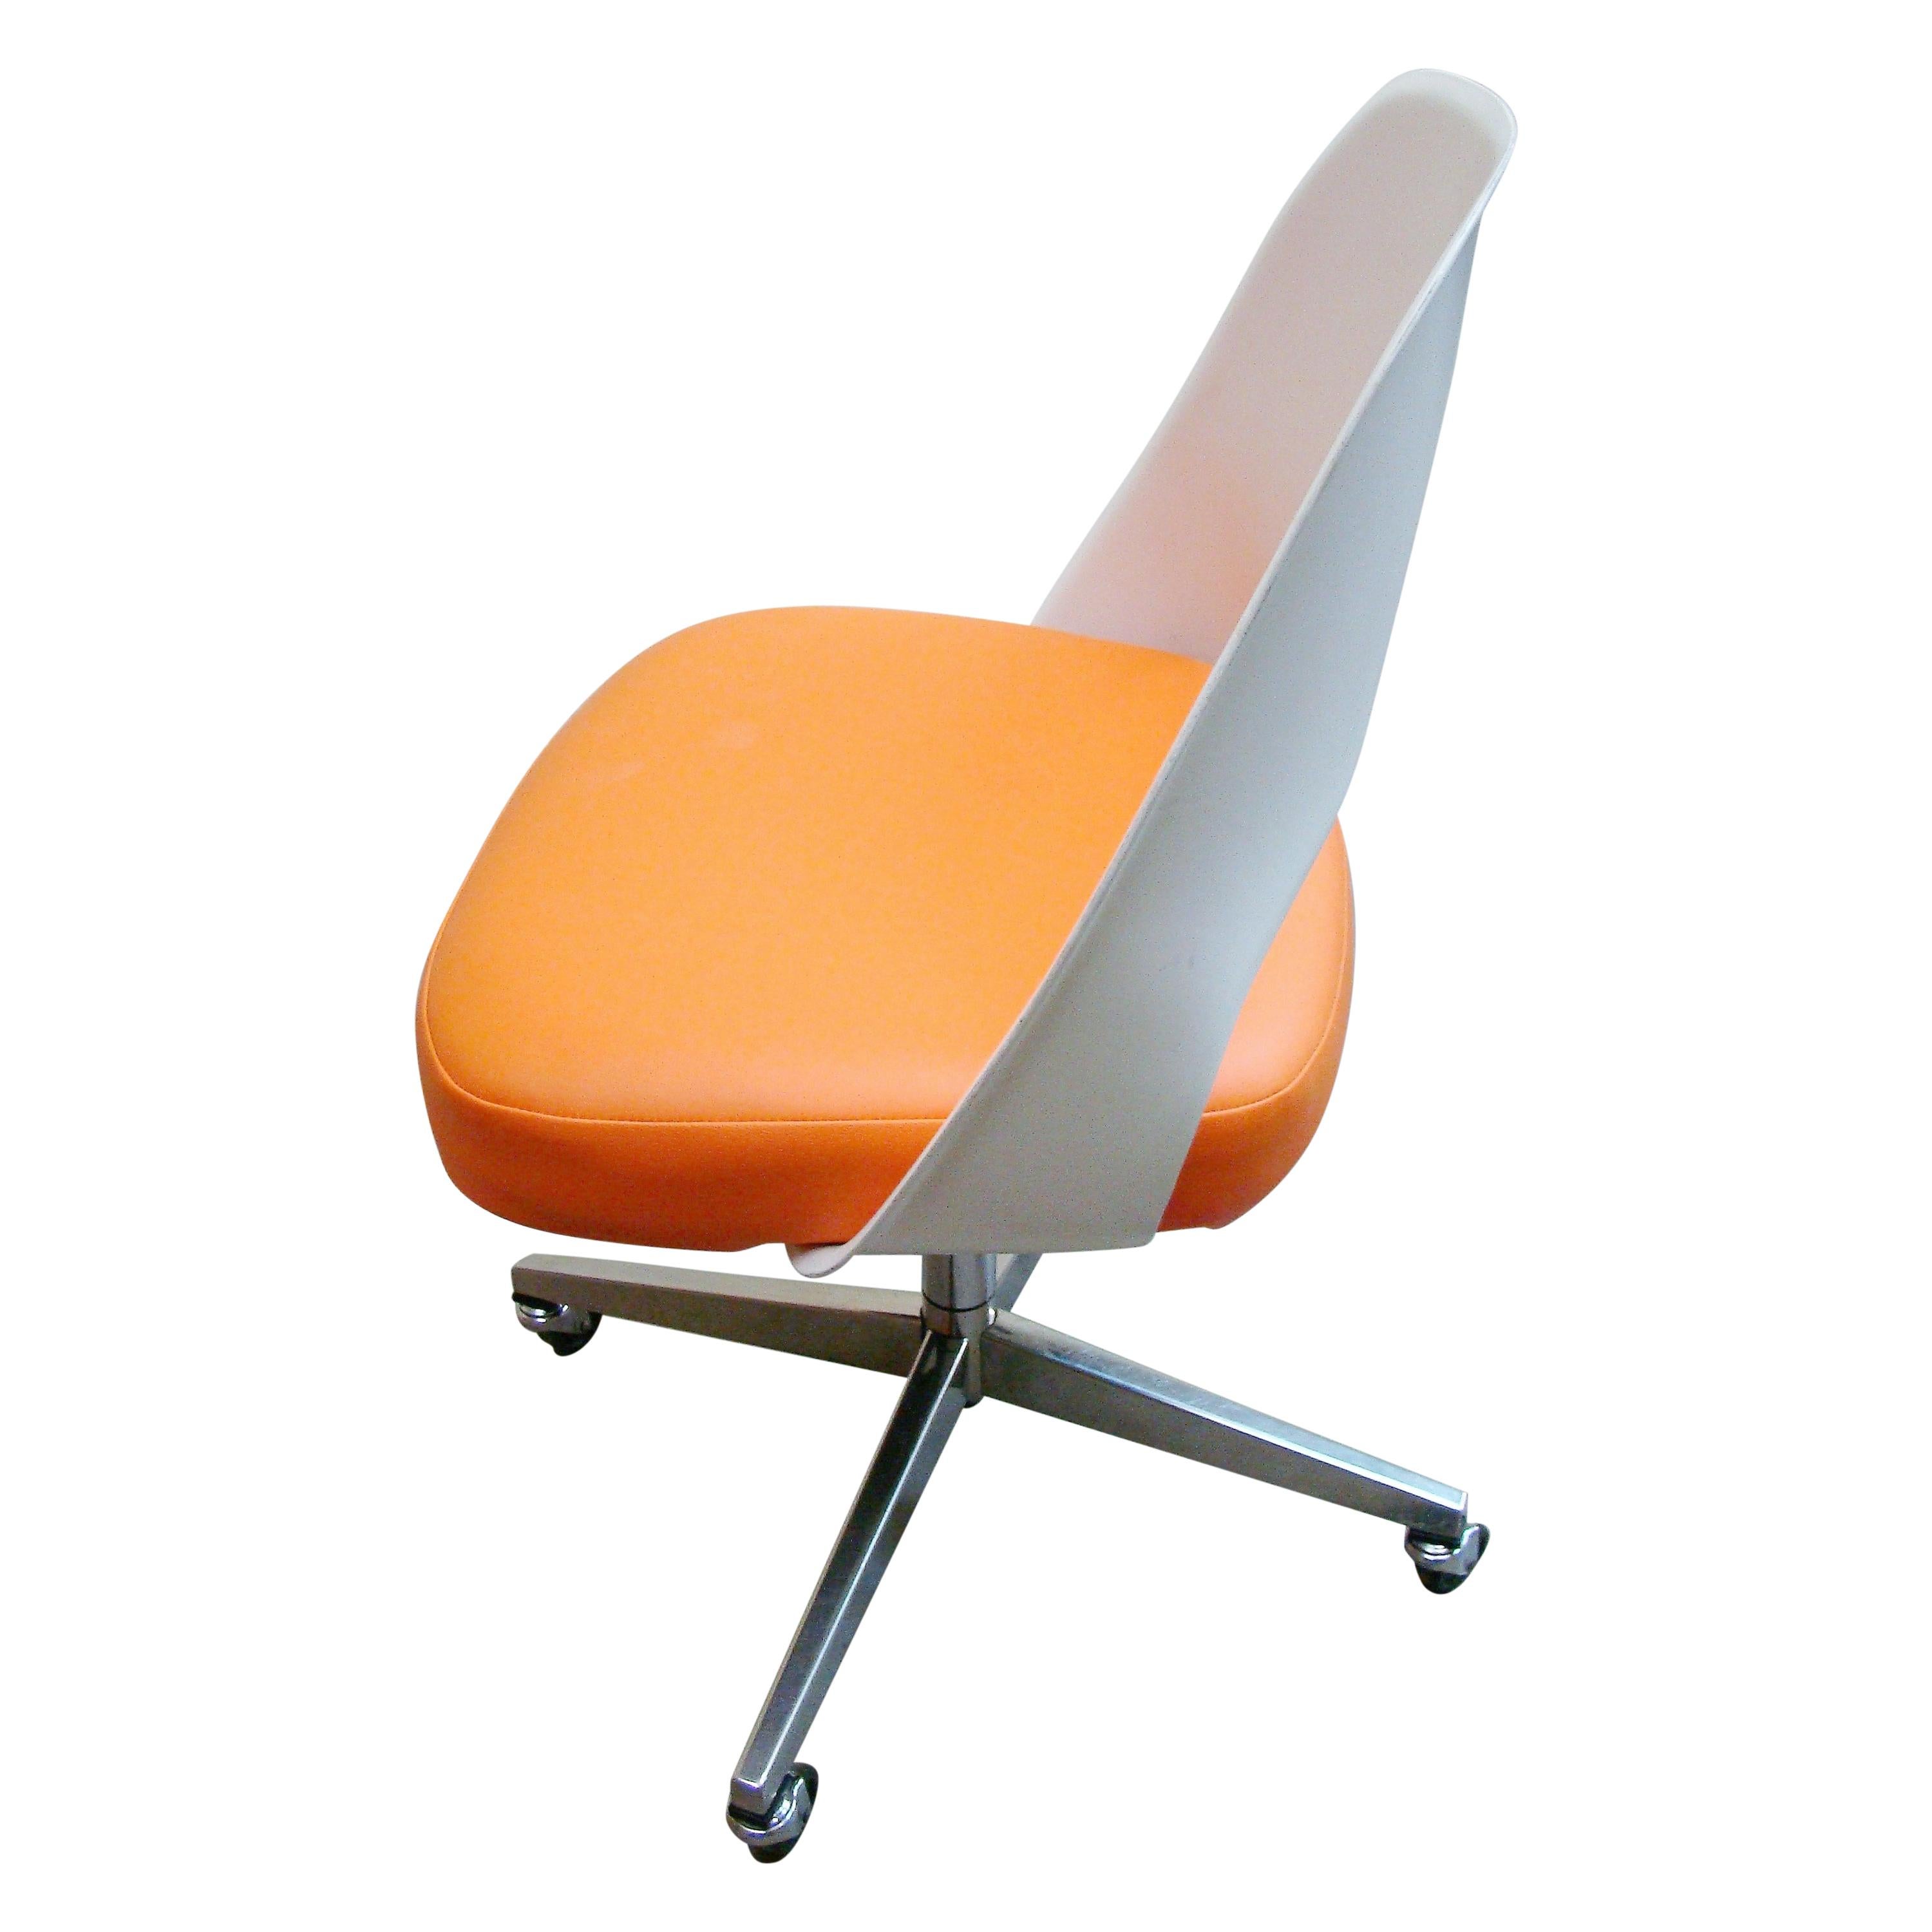 Early Knoll Saarinen Executive Side Chair with Casters in Orange and White